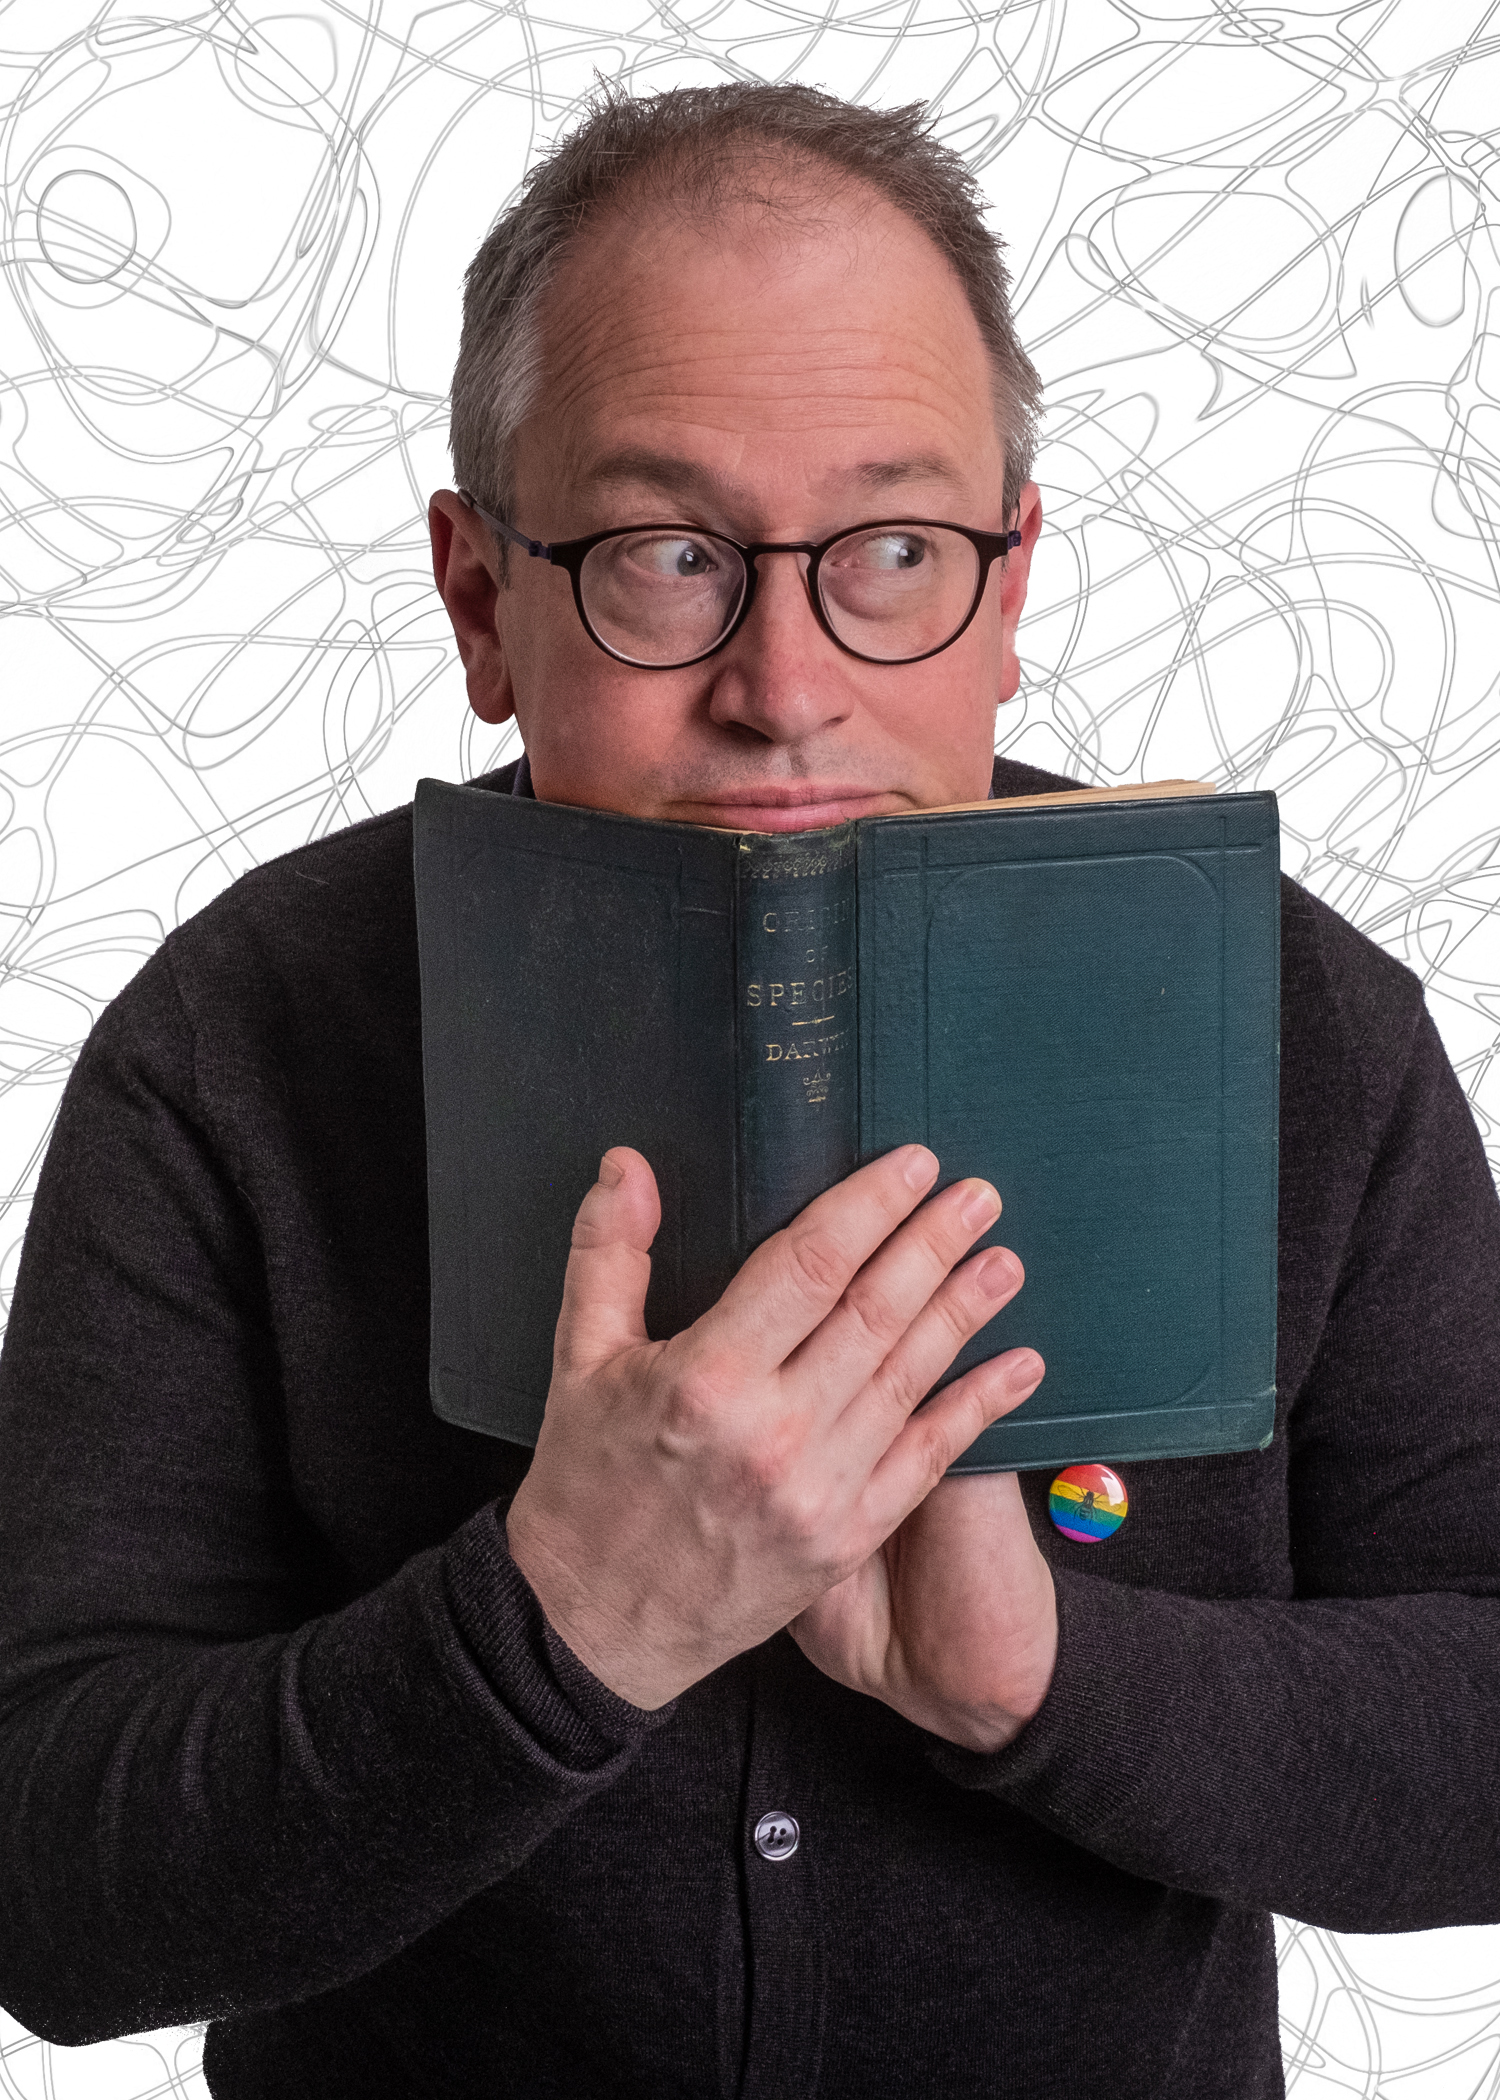 Robin Ince's Chaos of Delights - photocredit, Steve Best